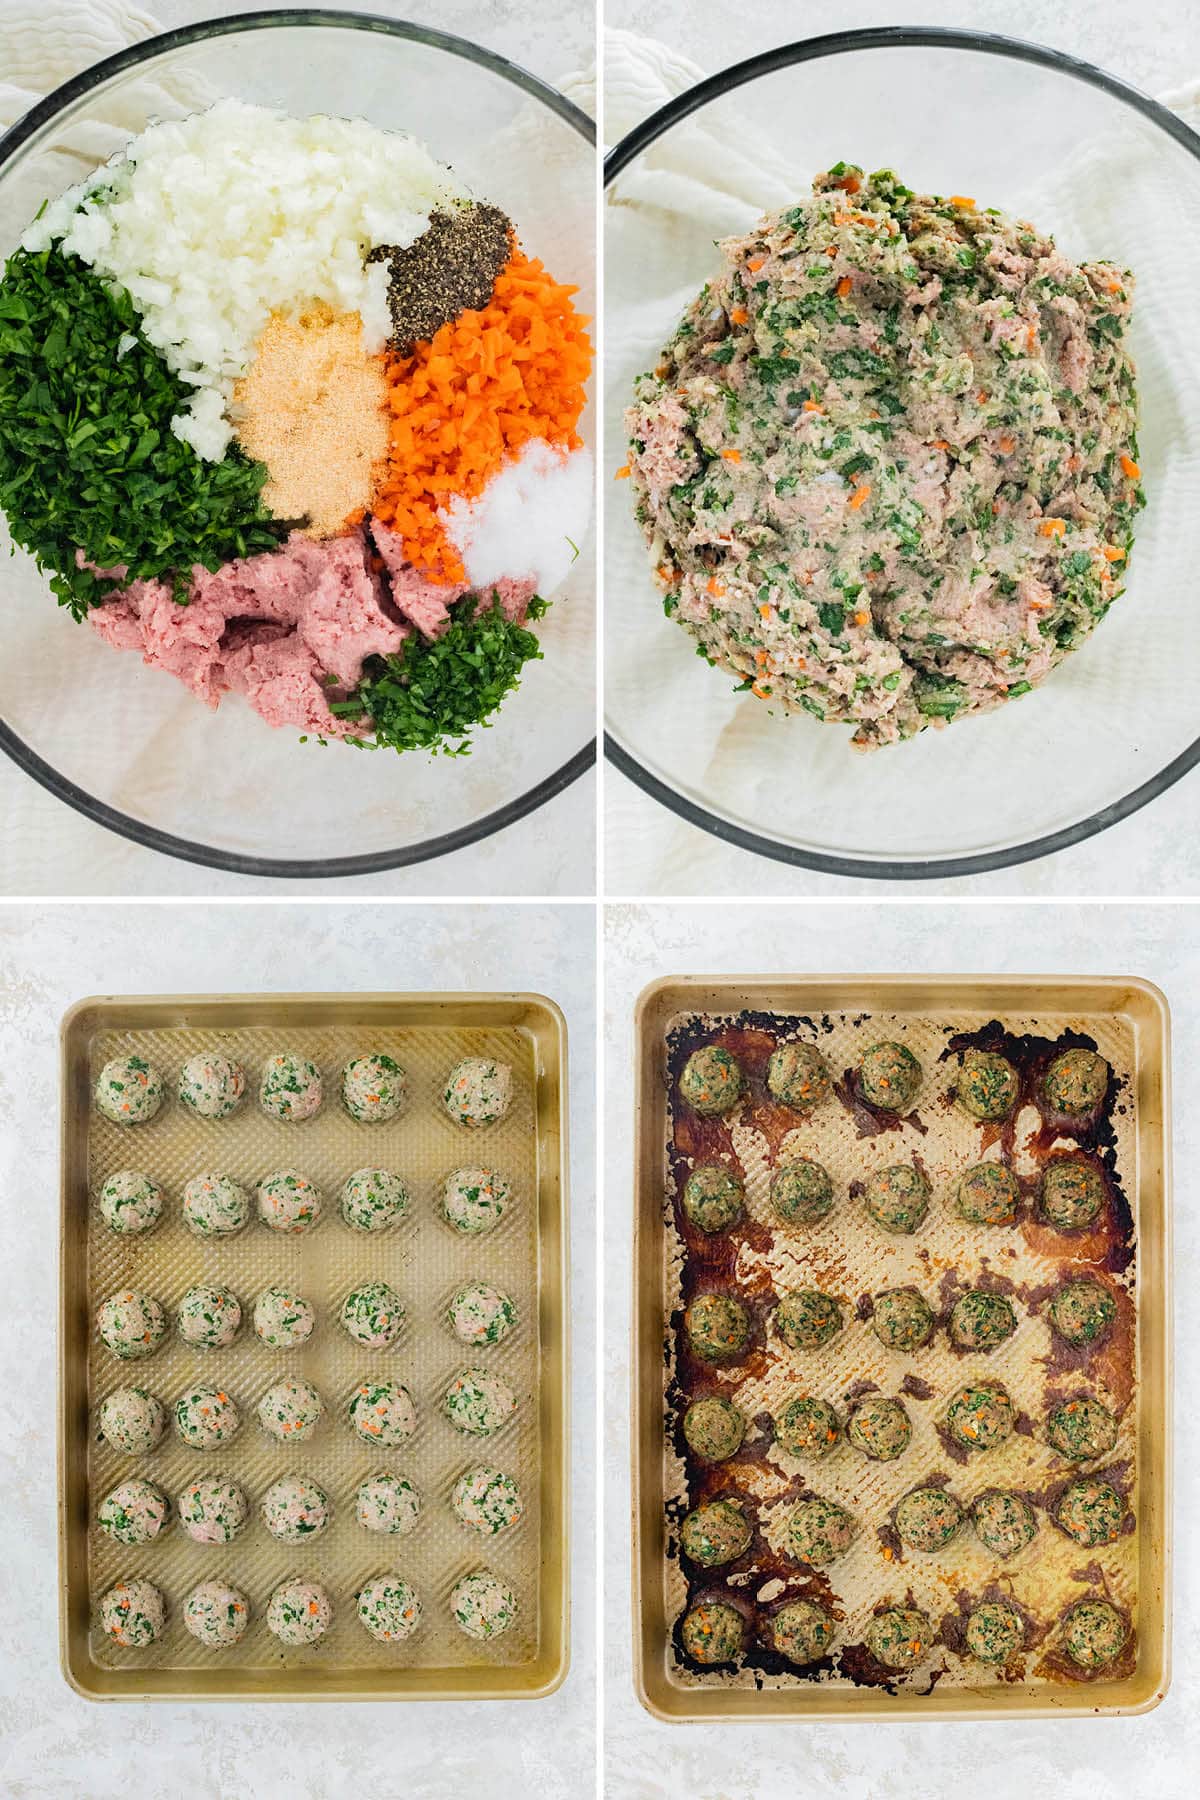 Collage of four photos showing the steps to make Turkey Spinach Meatballs mixing ground turkey with veggies, rolling into meatballs on a baking pan and then baking the meatballs.